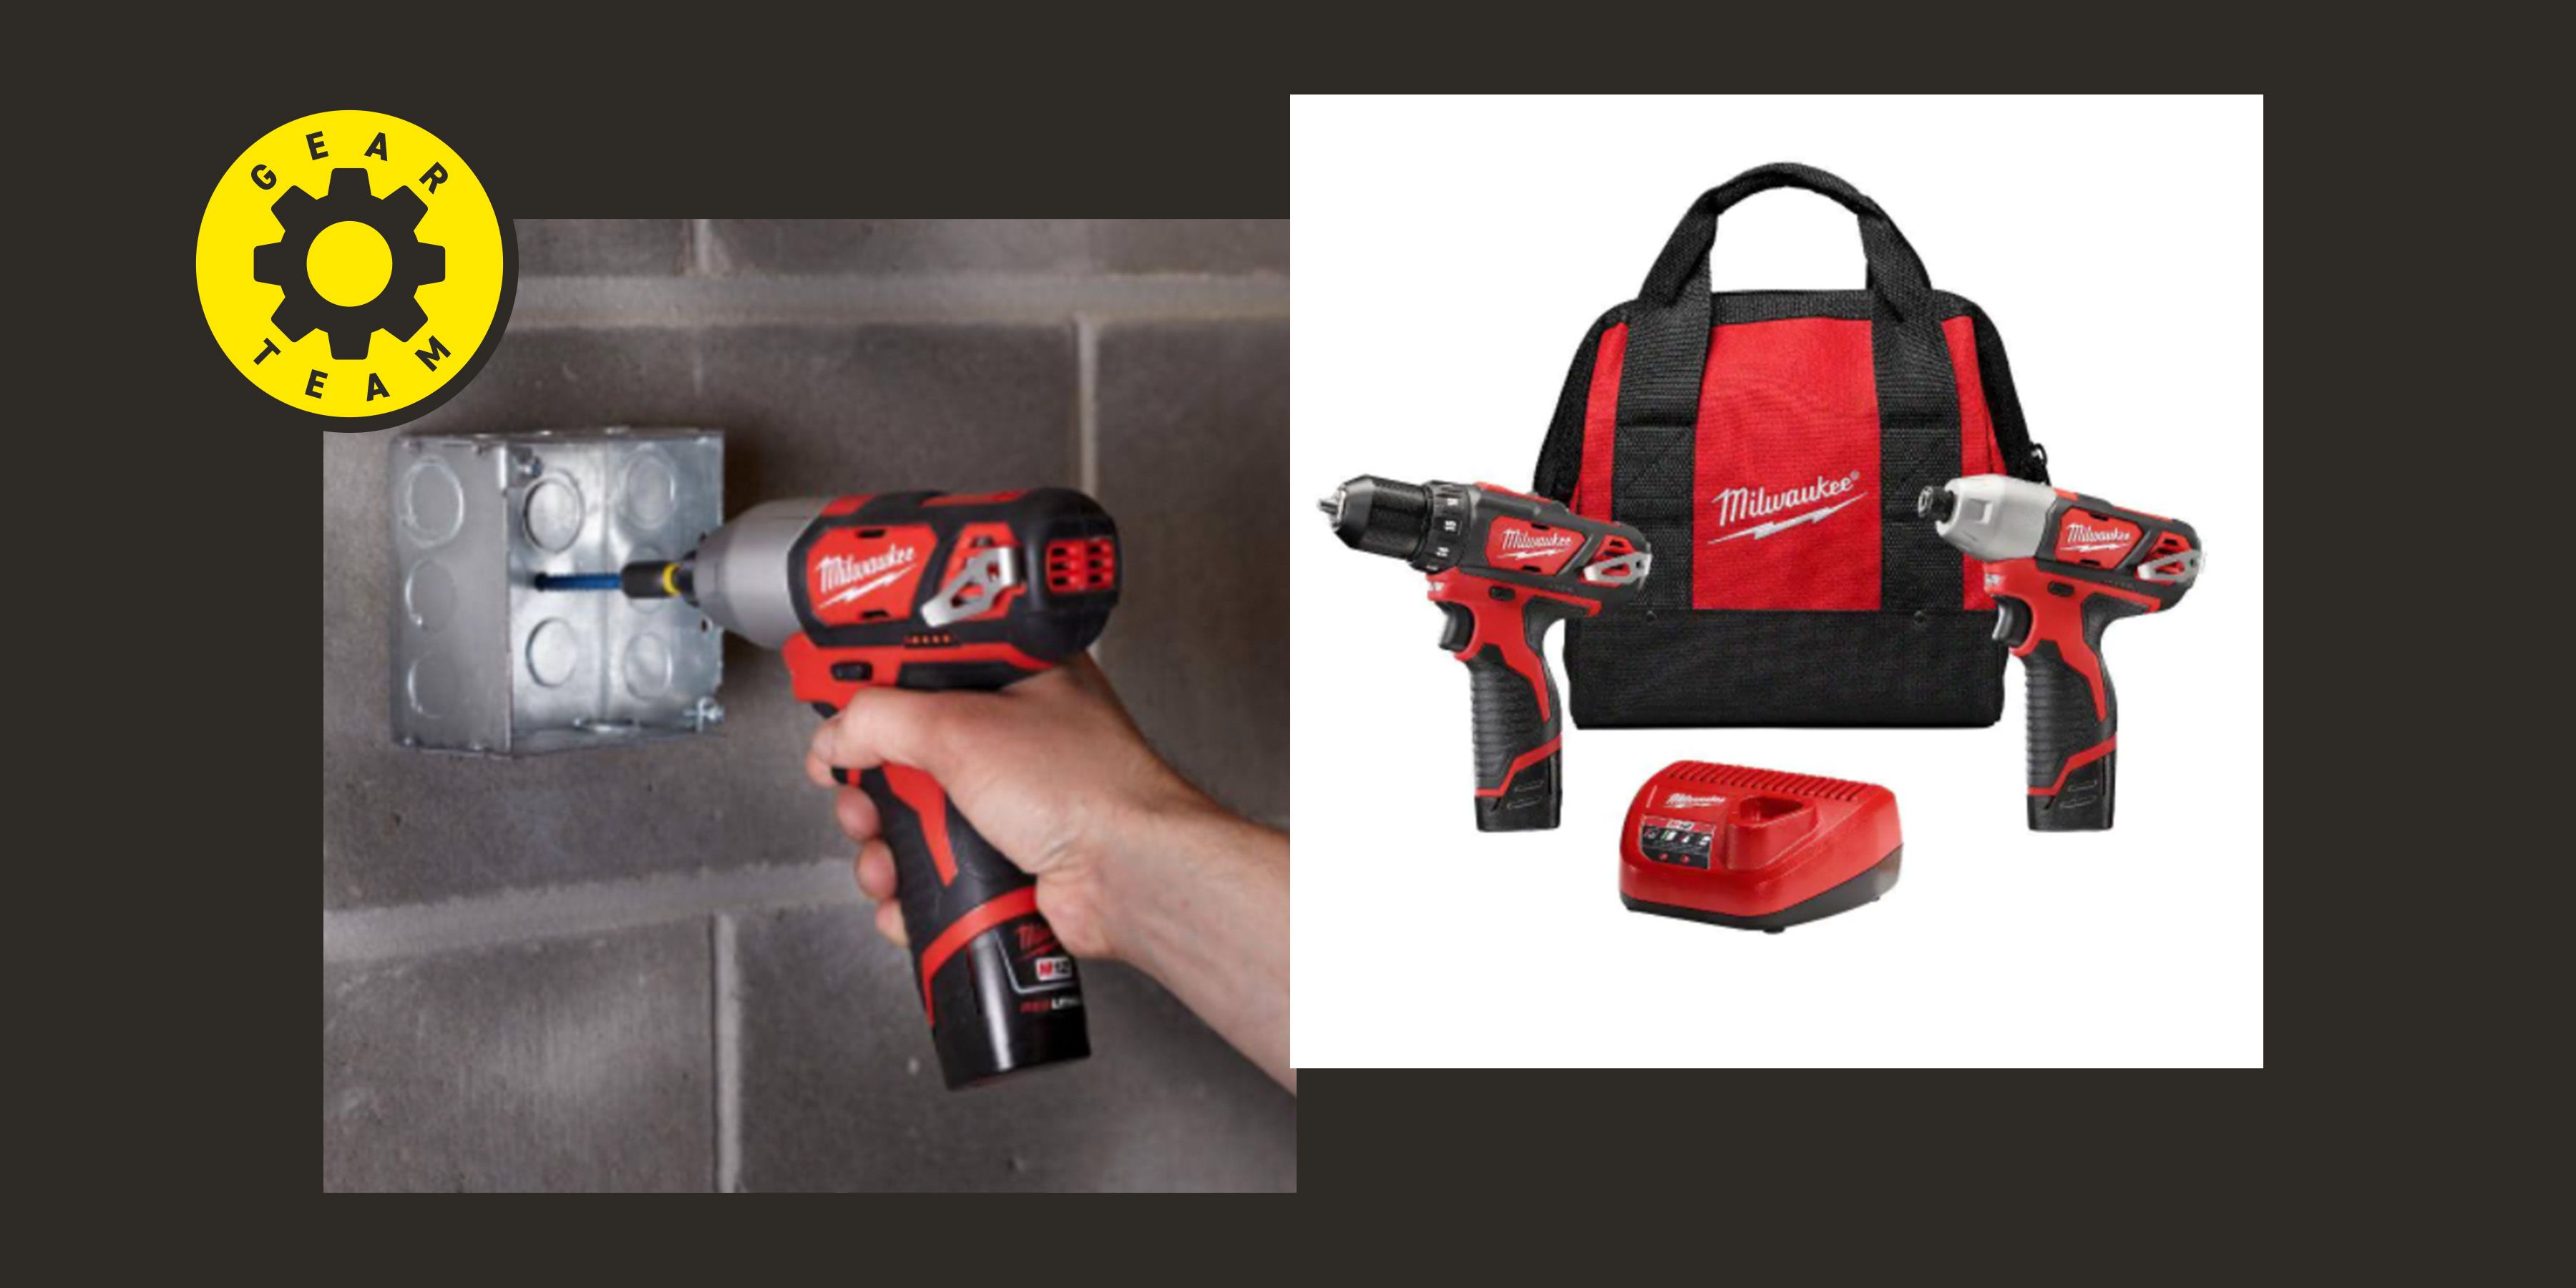 Save 41% On This Milwaukee Drill/Impact Combo